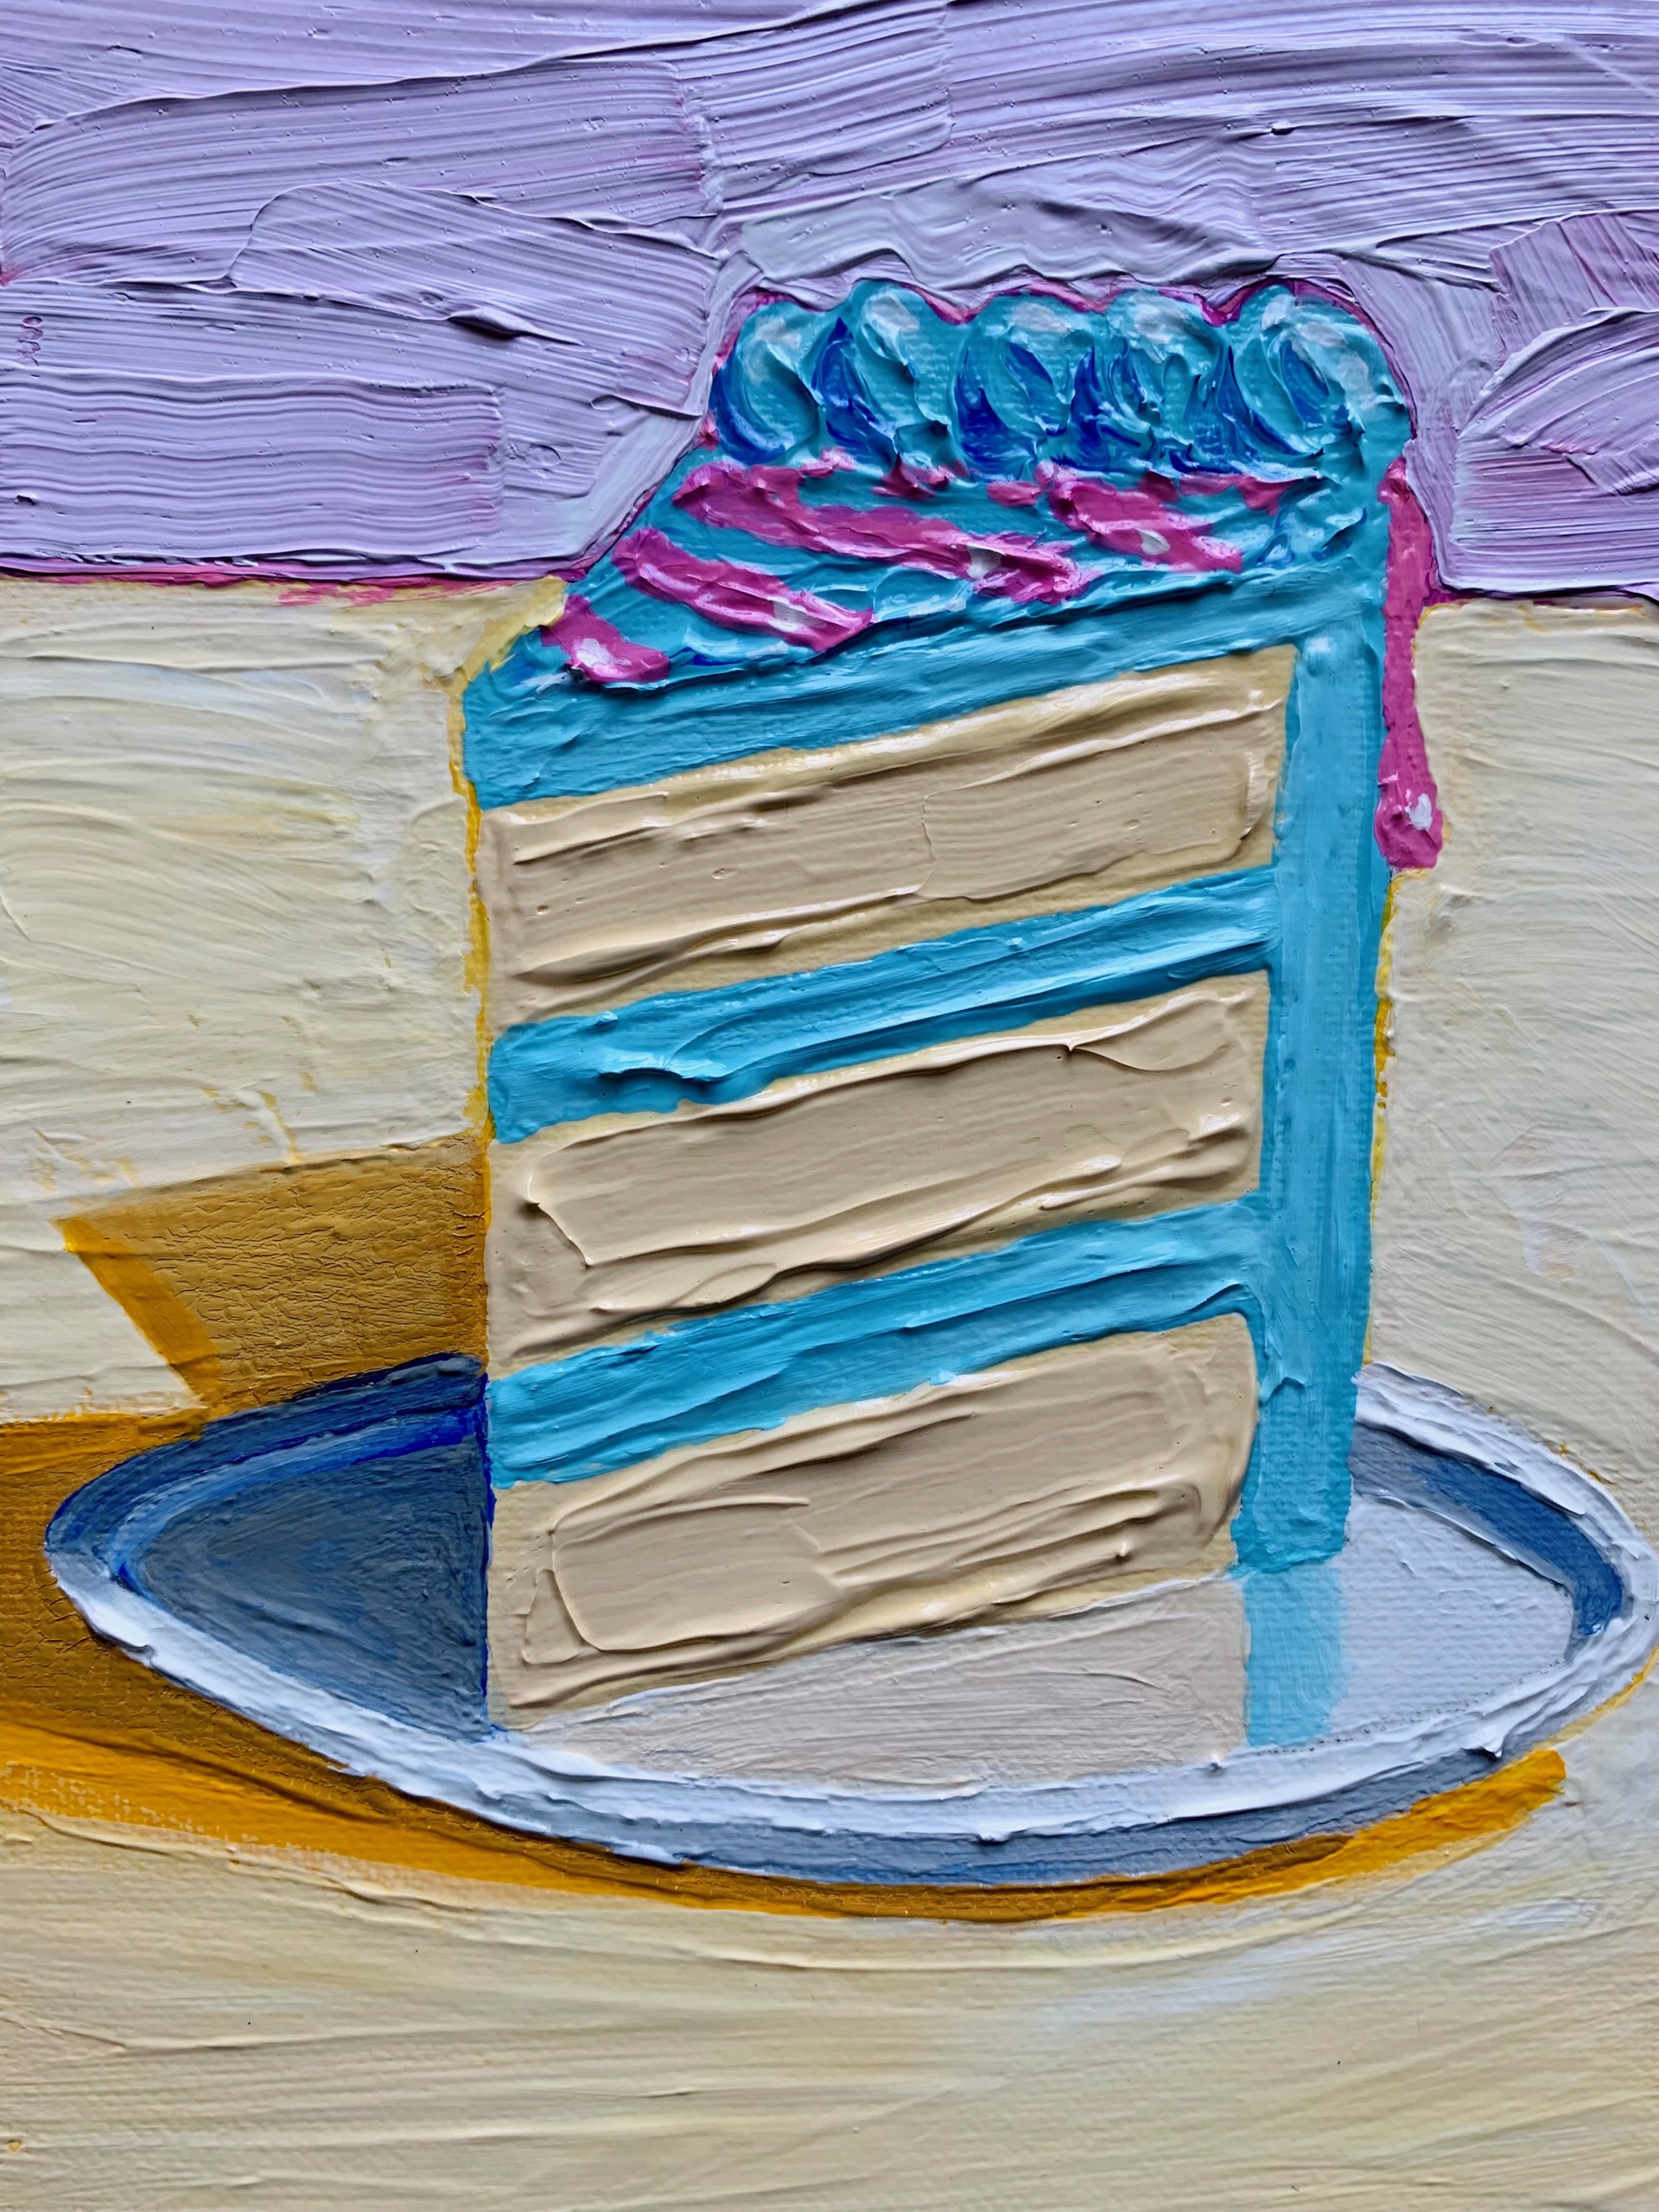 Vanilla Cake With Blue Icing by Craig Ford